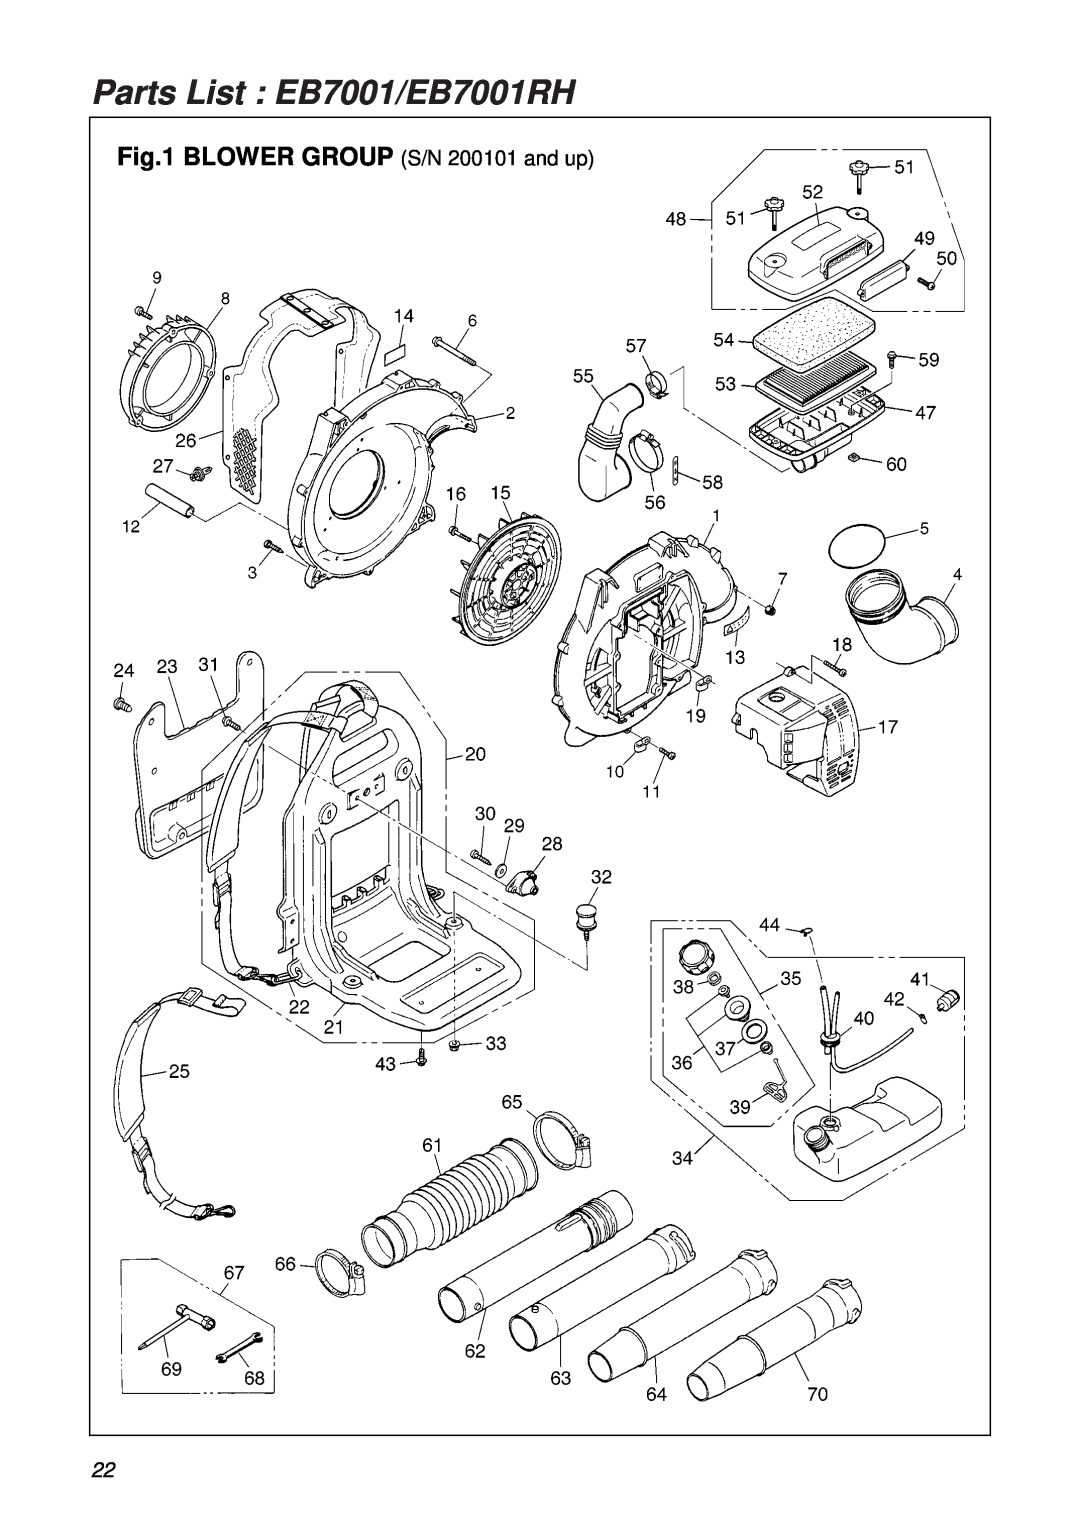 RedMax manual Parts List EB7001/EB7001RH, BLOWER GROUP S/N 200101 and up 